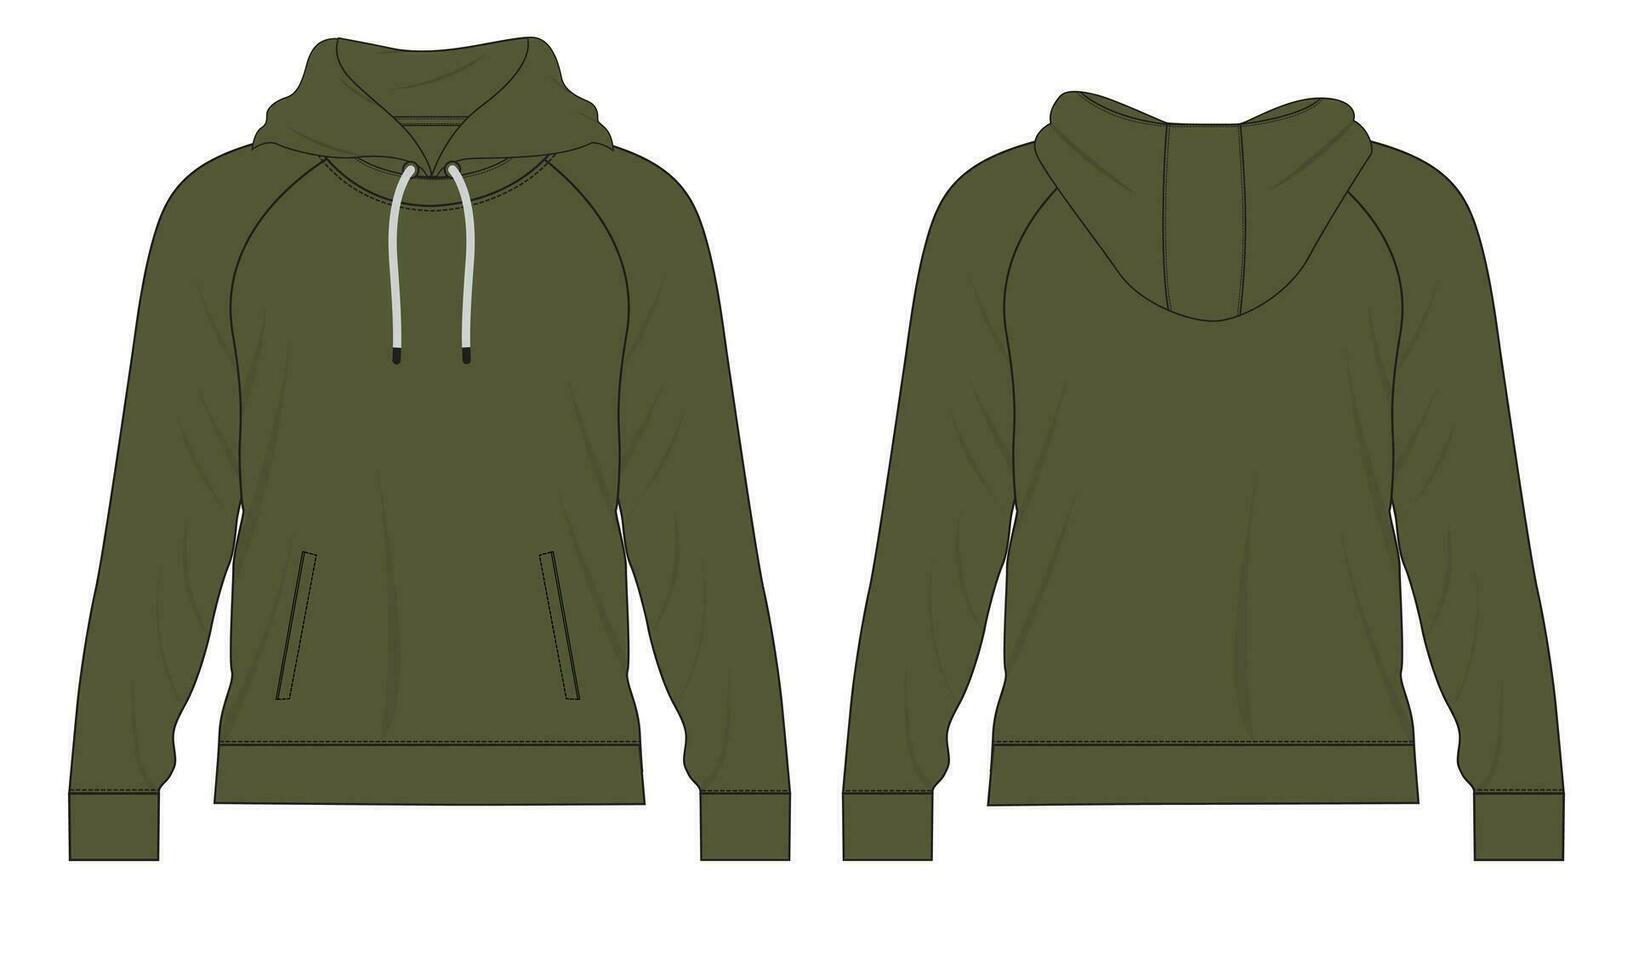 Hoodie Technical fashion flat sketch Vector template. Cotton fleece fabric Apparel hooded sweatshirt illustration mock up Front, back views.